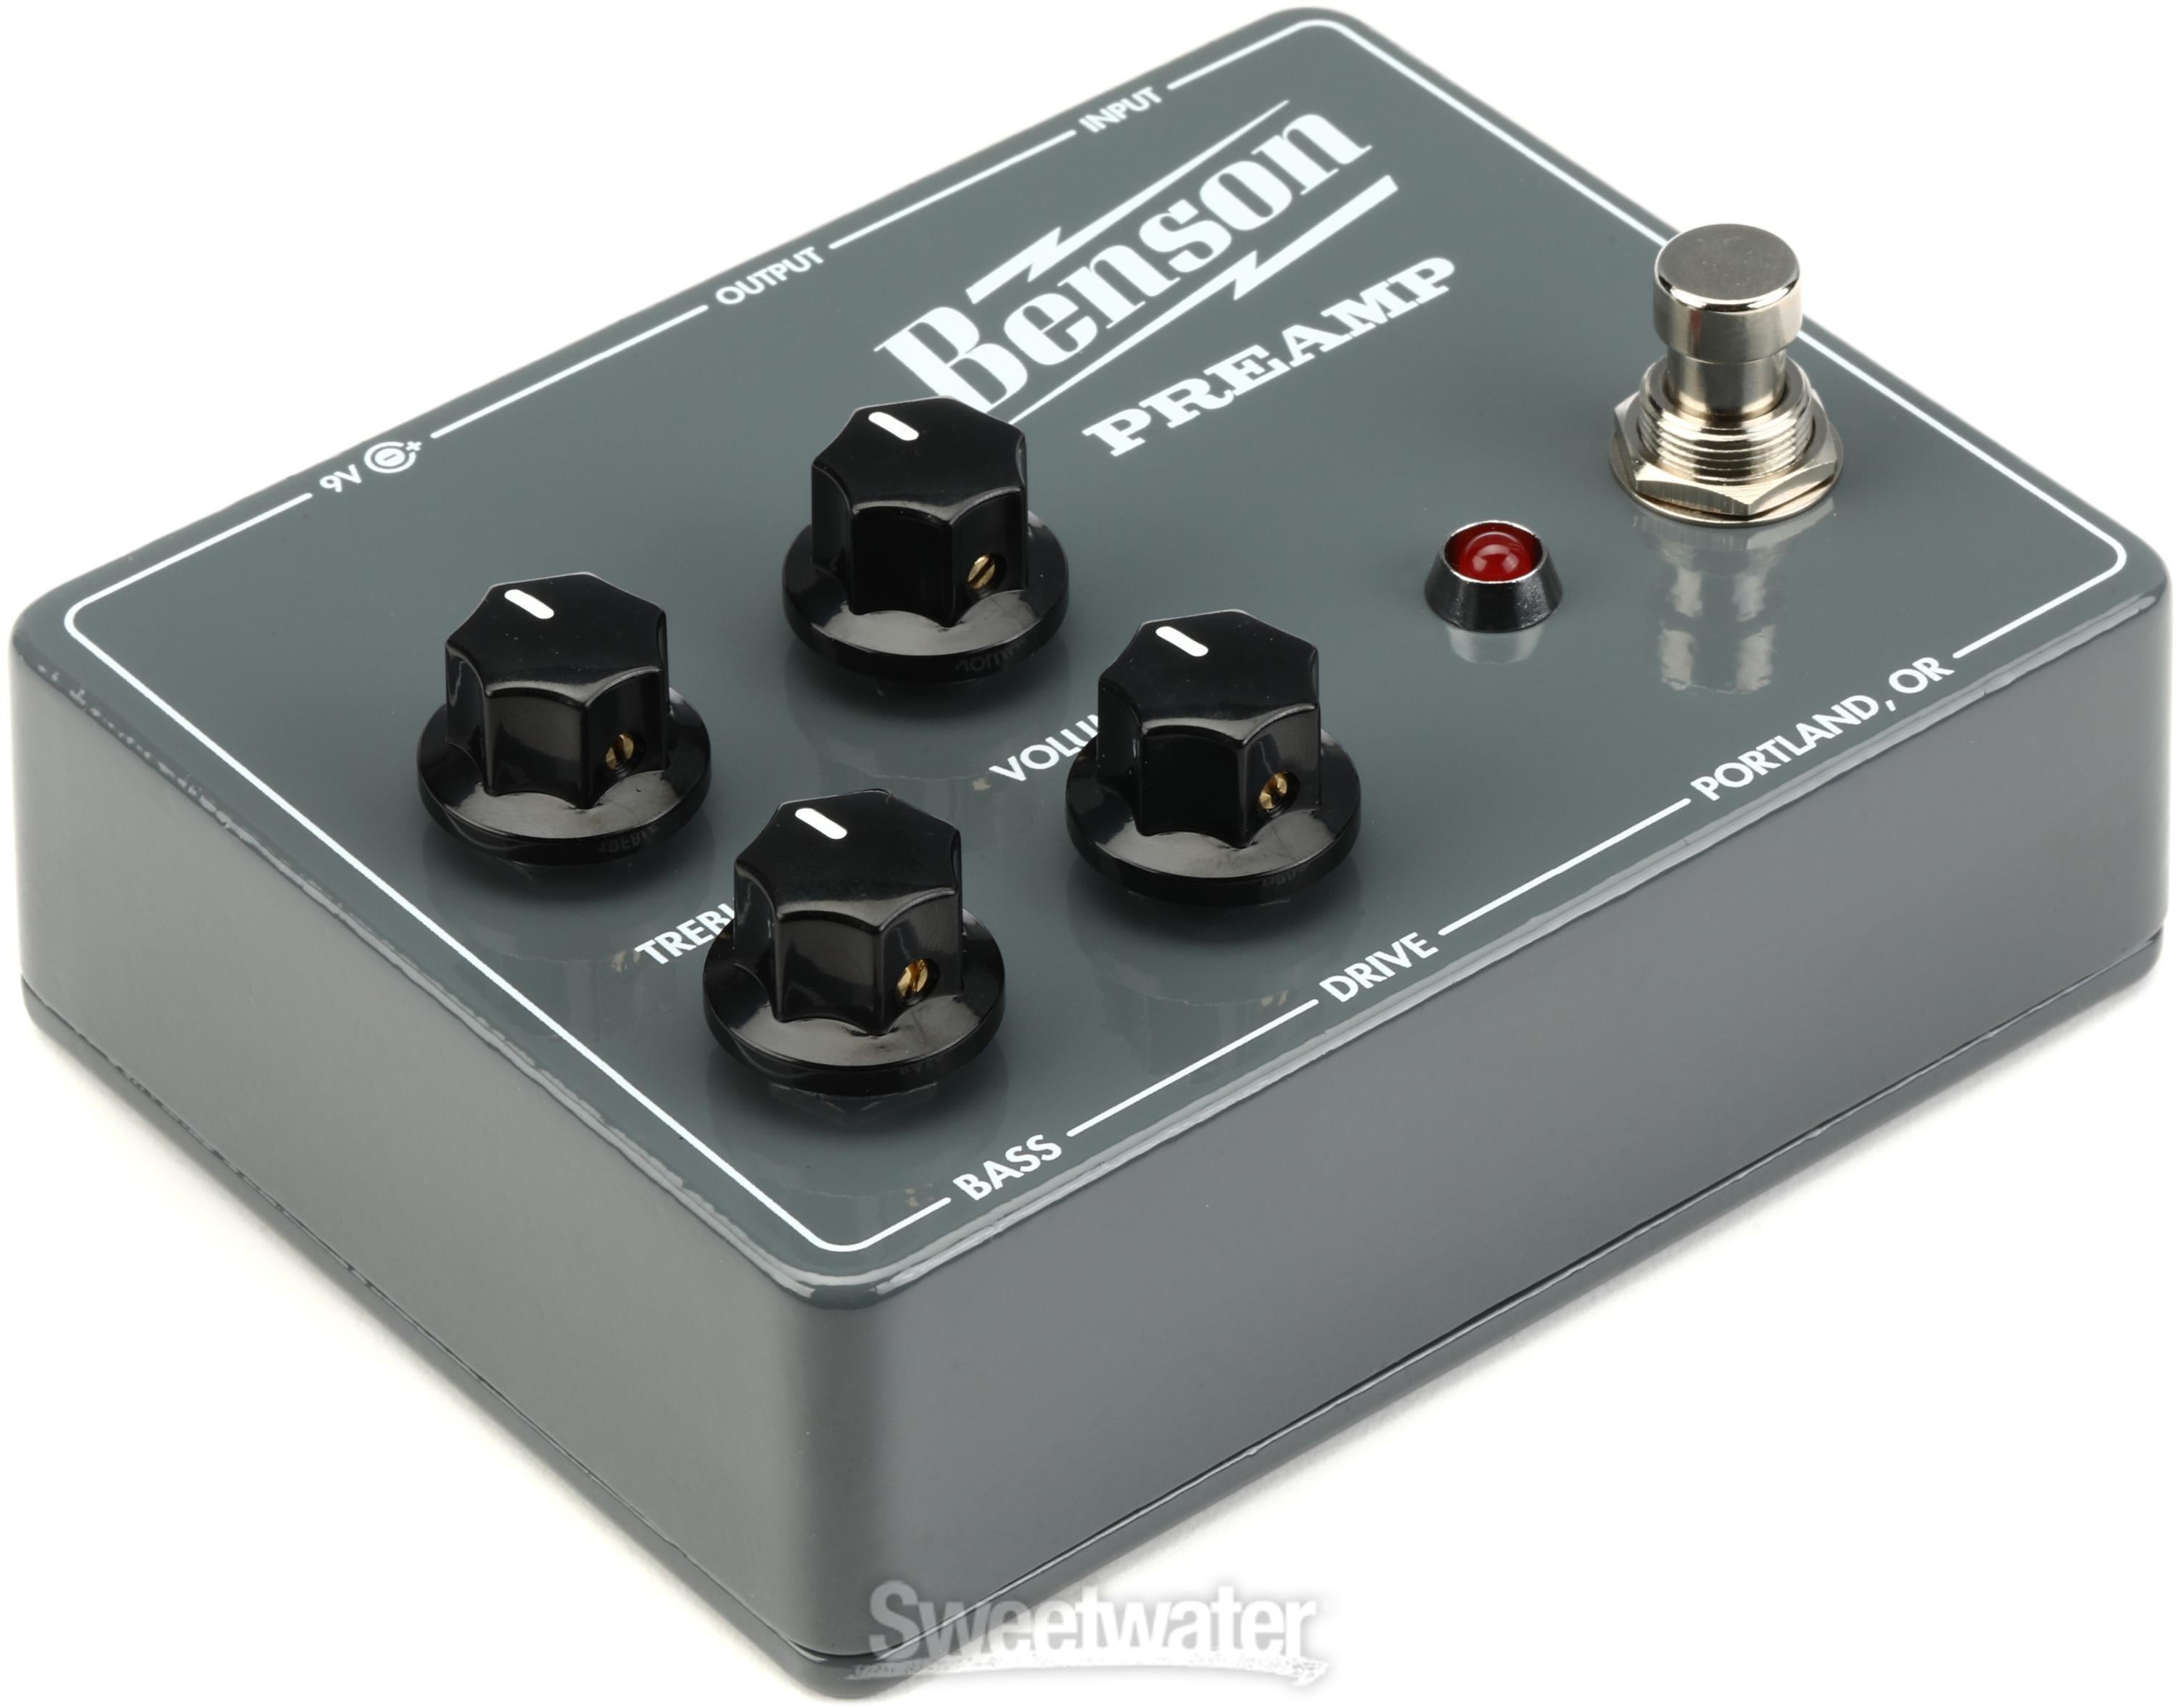 Benson Amps Preamp Pedal | Sweetwater